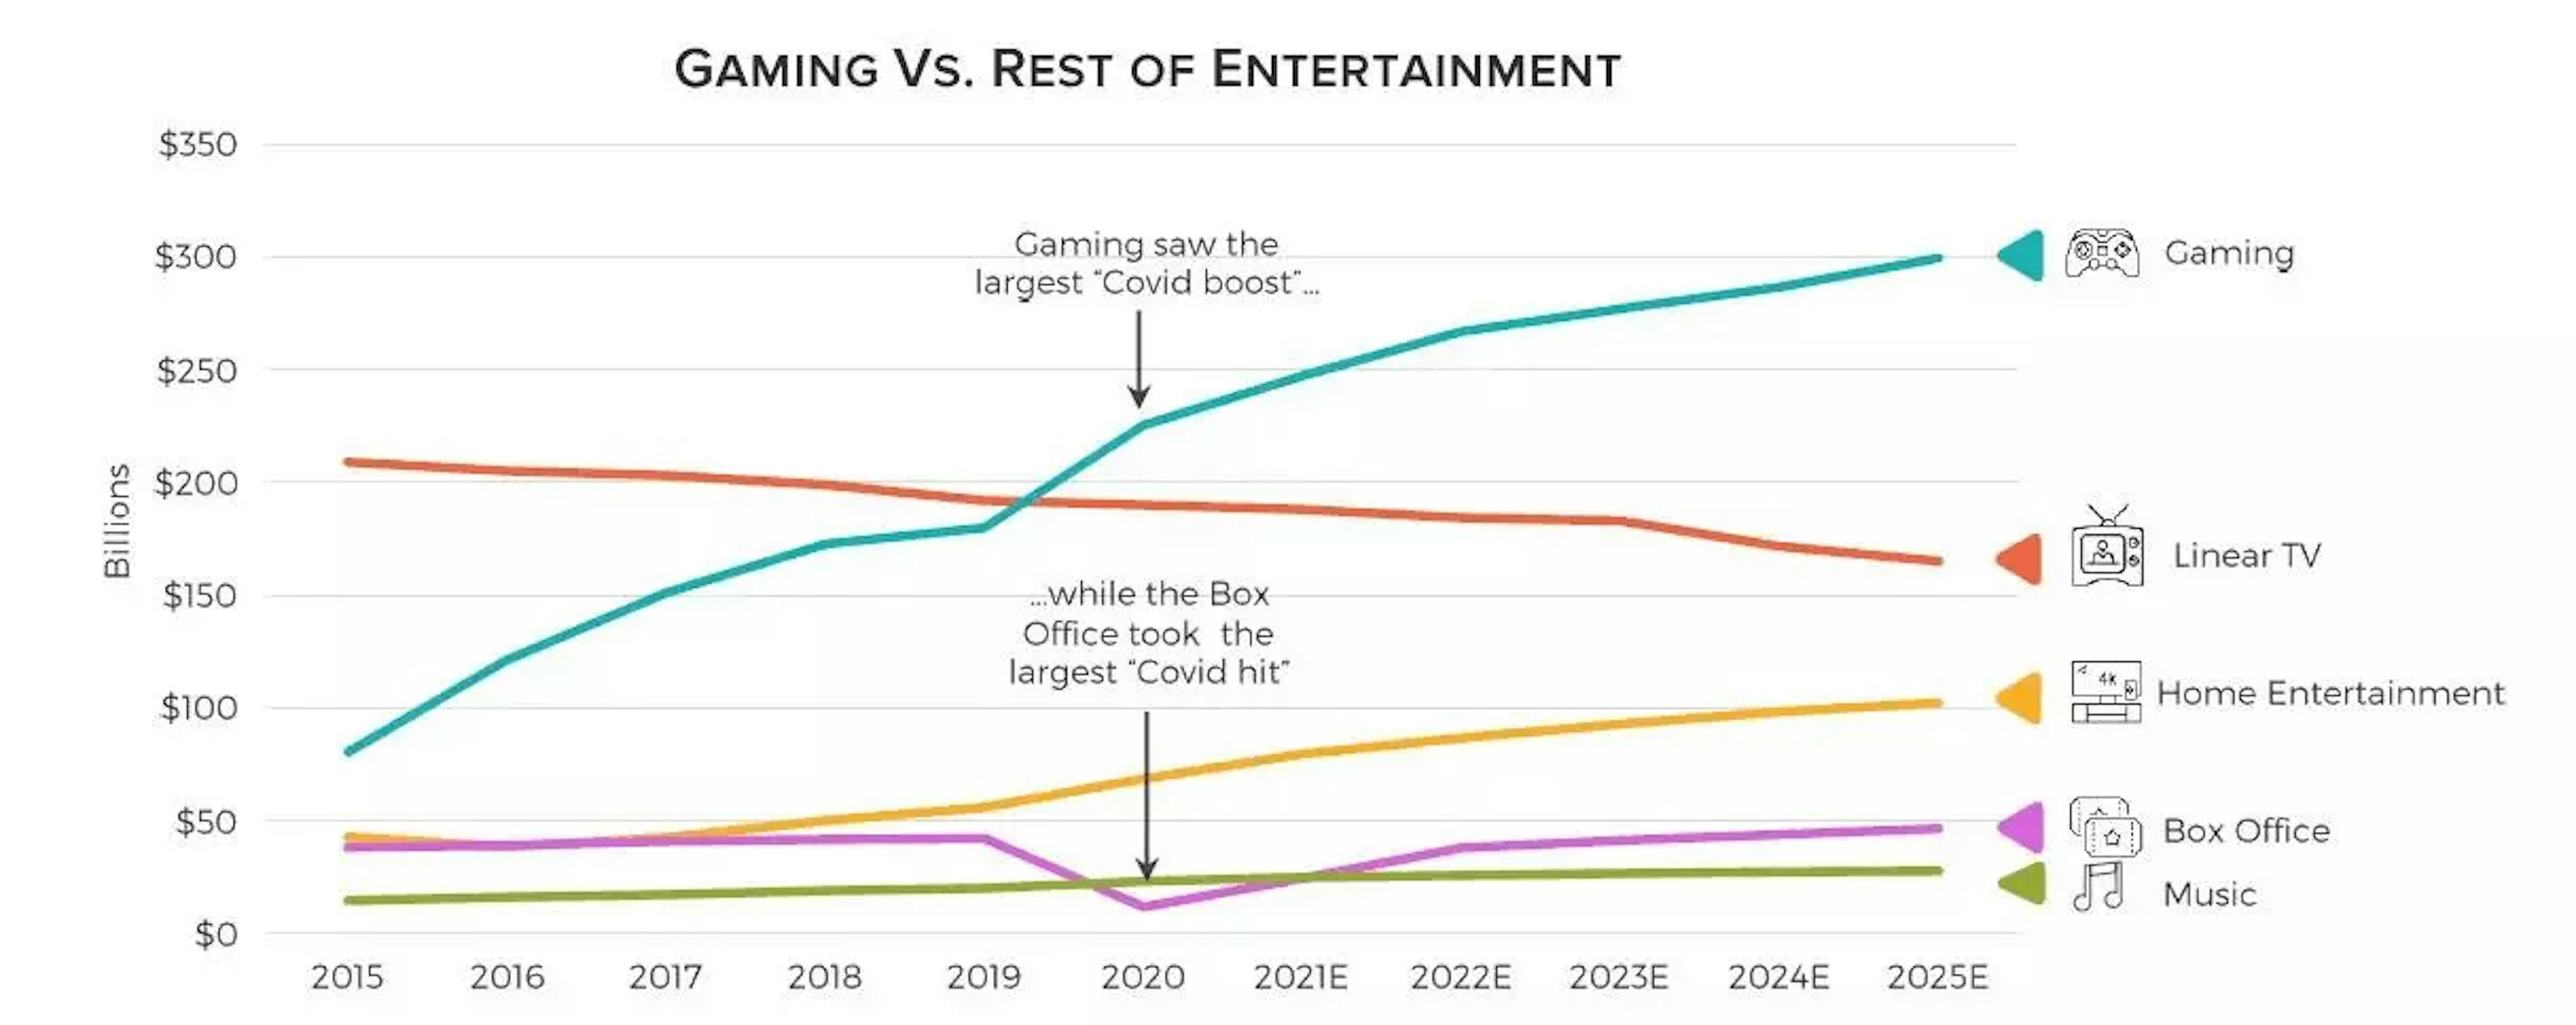 Gaming vs rest of entertainment